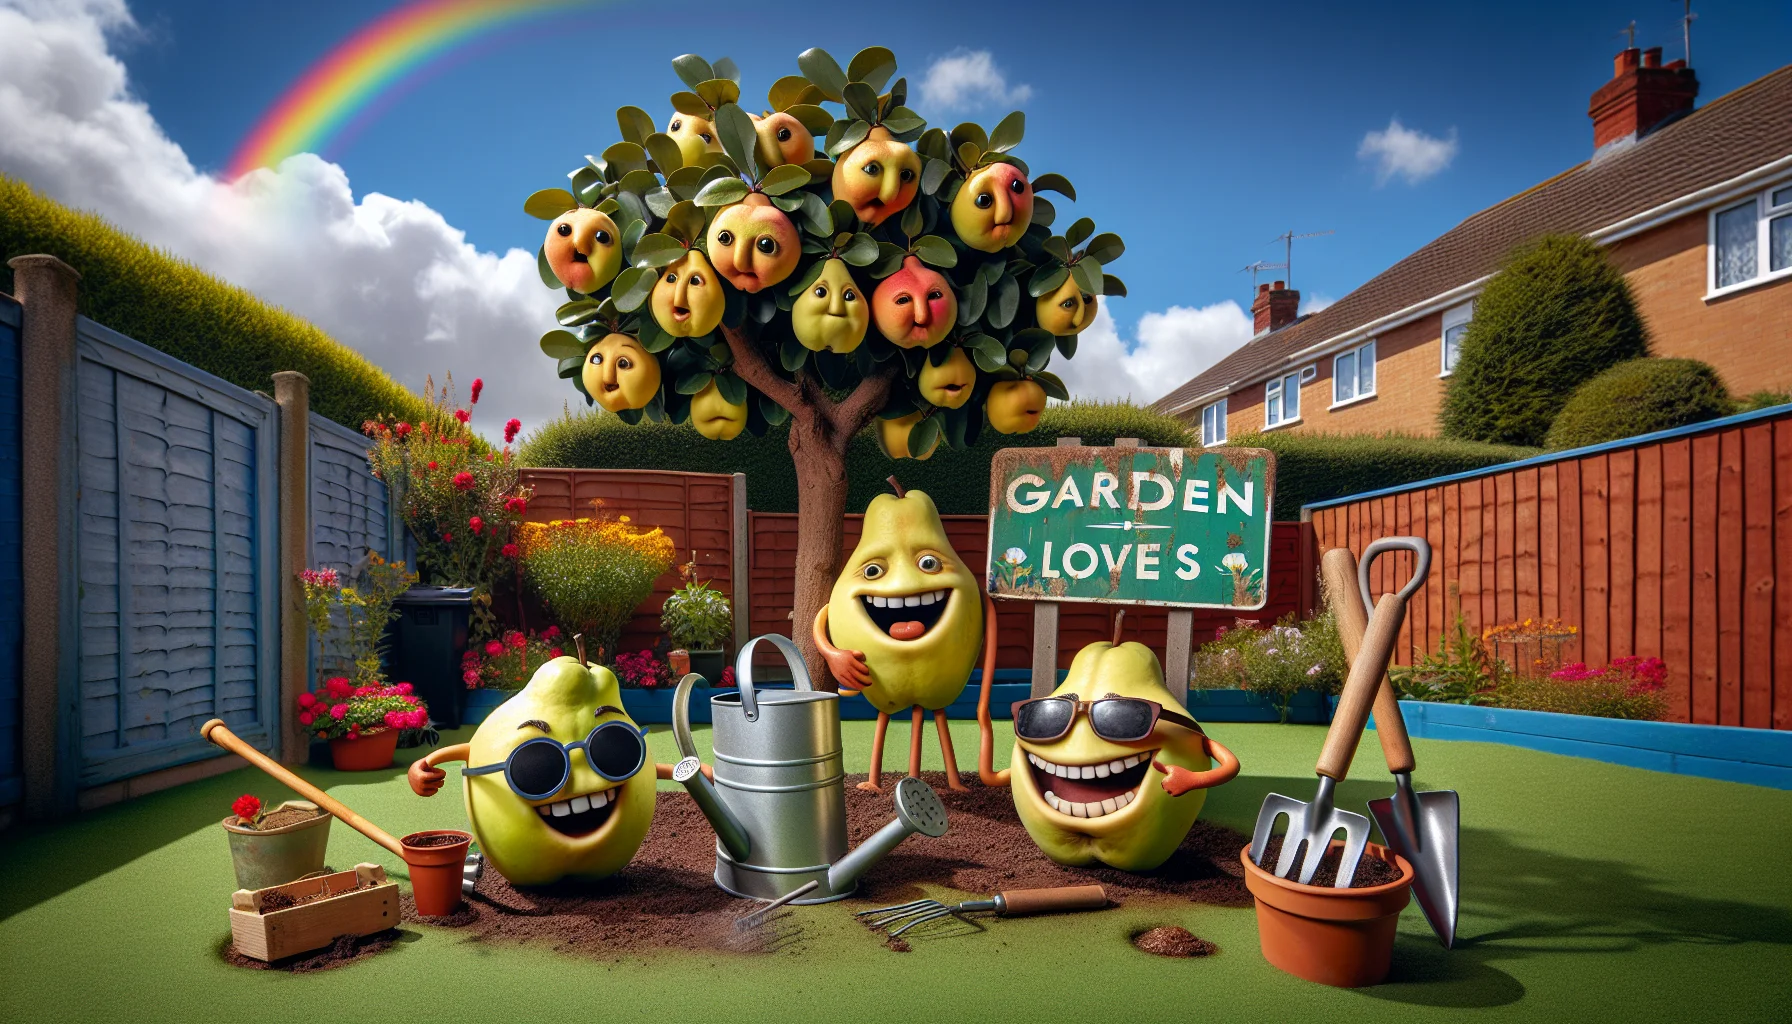 Imagine a humorous scene that spotlights Cydonia oblonga (commonly known as the quince tree). In this lighthearted setup, the tree displays facial expressions with roller shades and eyes on their fruits. They're engaging in a jovial conversation with an animated, life-sized gardening trowel and a watering can, both nex to a soiled 'GARDEN LOVERS' sign. The background is a typical suburban backyard with immaculate green lawns, bright flowers in bloom, and a fence. A rainbow arches across the sunny blue sky, and a cheeky gnome with a wide grin gives a thumbs-up from the corner. Let this portrayal inspire the joy of gardening.